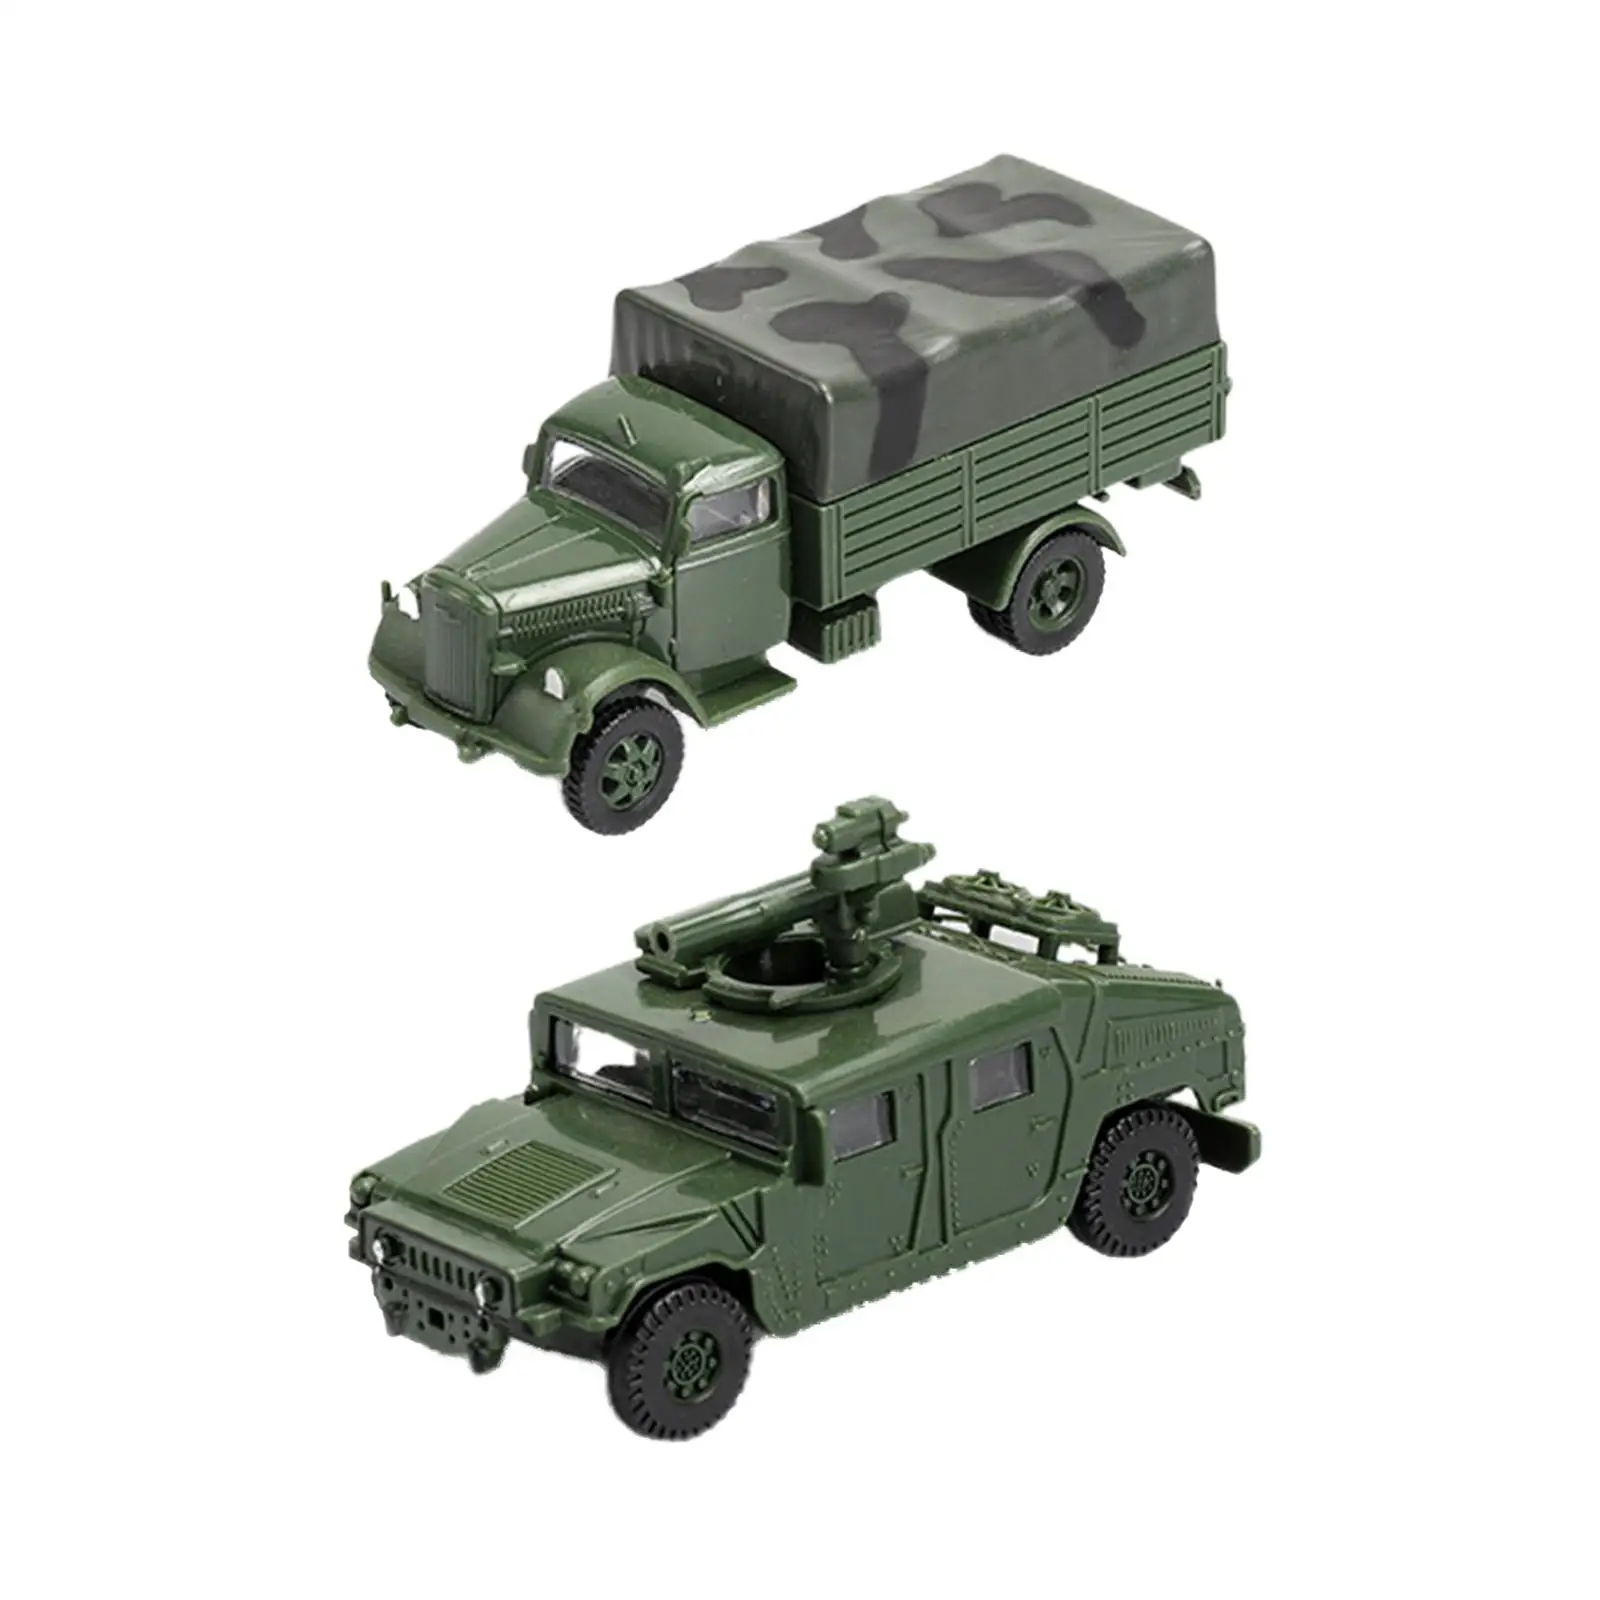 2x 4D 1:72 Assemble American Humvee Kits Collections Model Toys Hobby Building Puzzle Ornaments for Desktop Kids Gifts Men Gifts